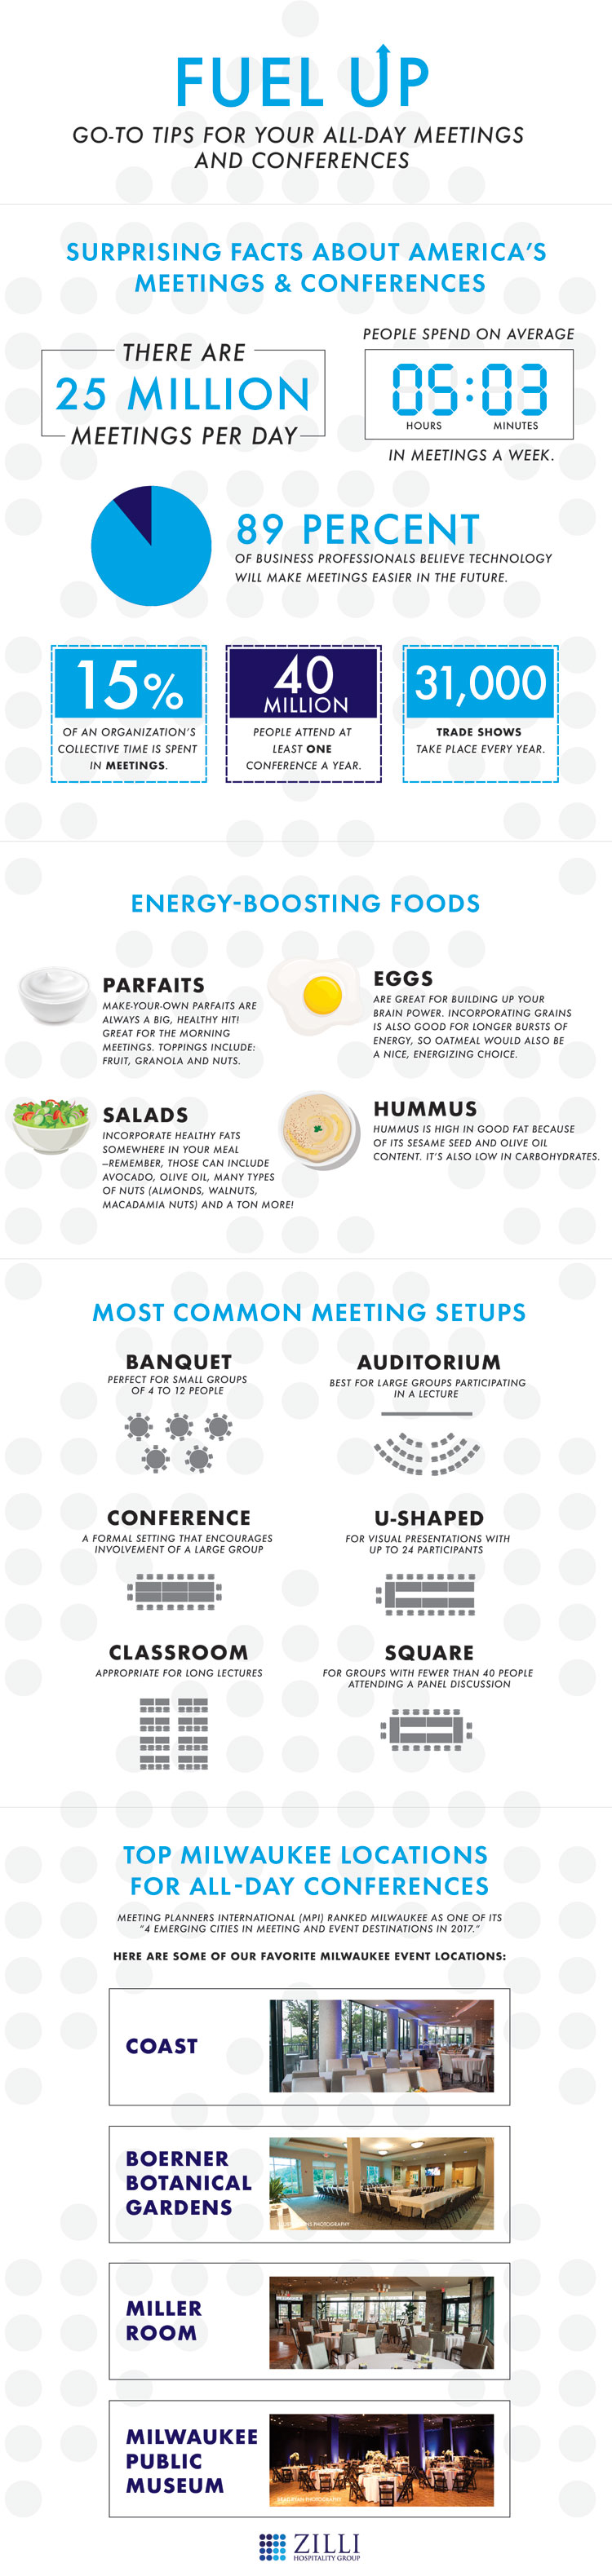 All Day Conferences Infographic